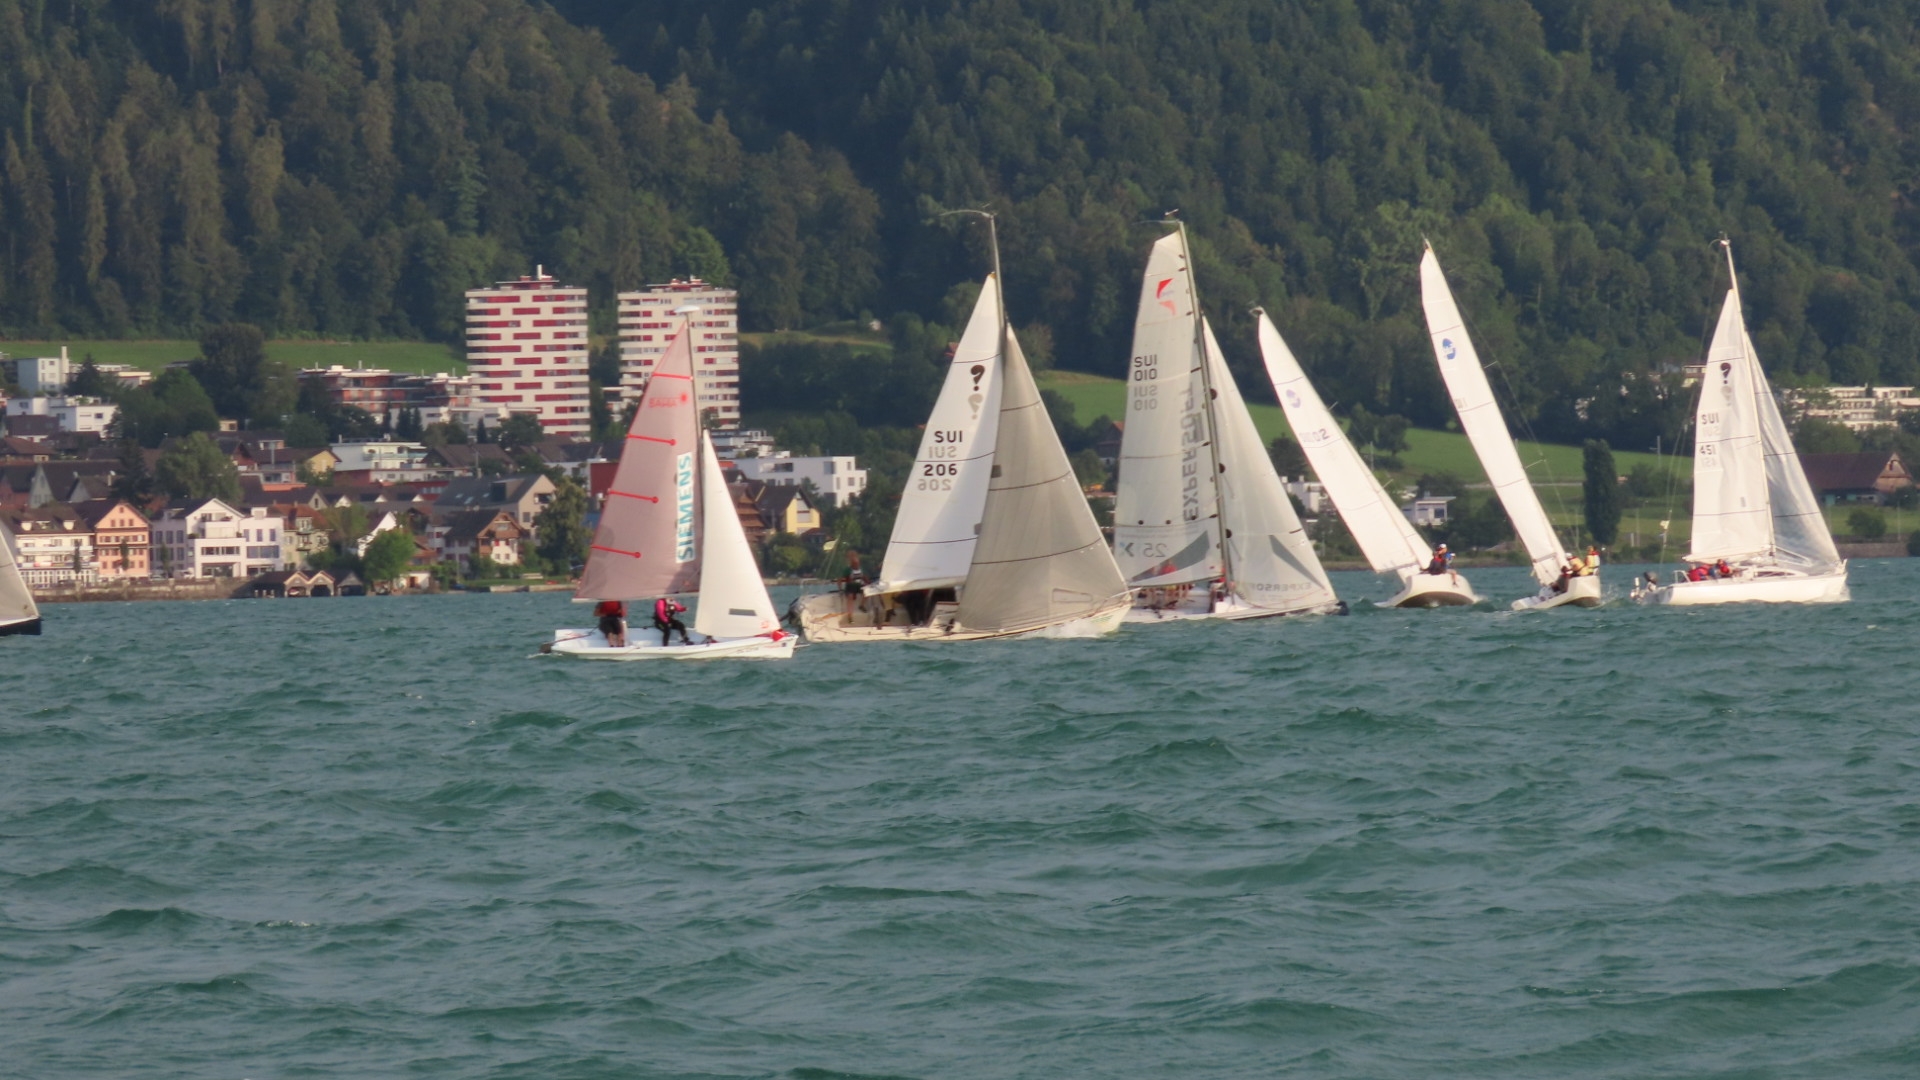  Weiss Yacht Cup  YC Zug  Day 3